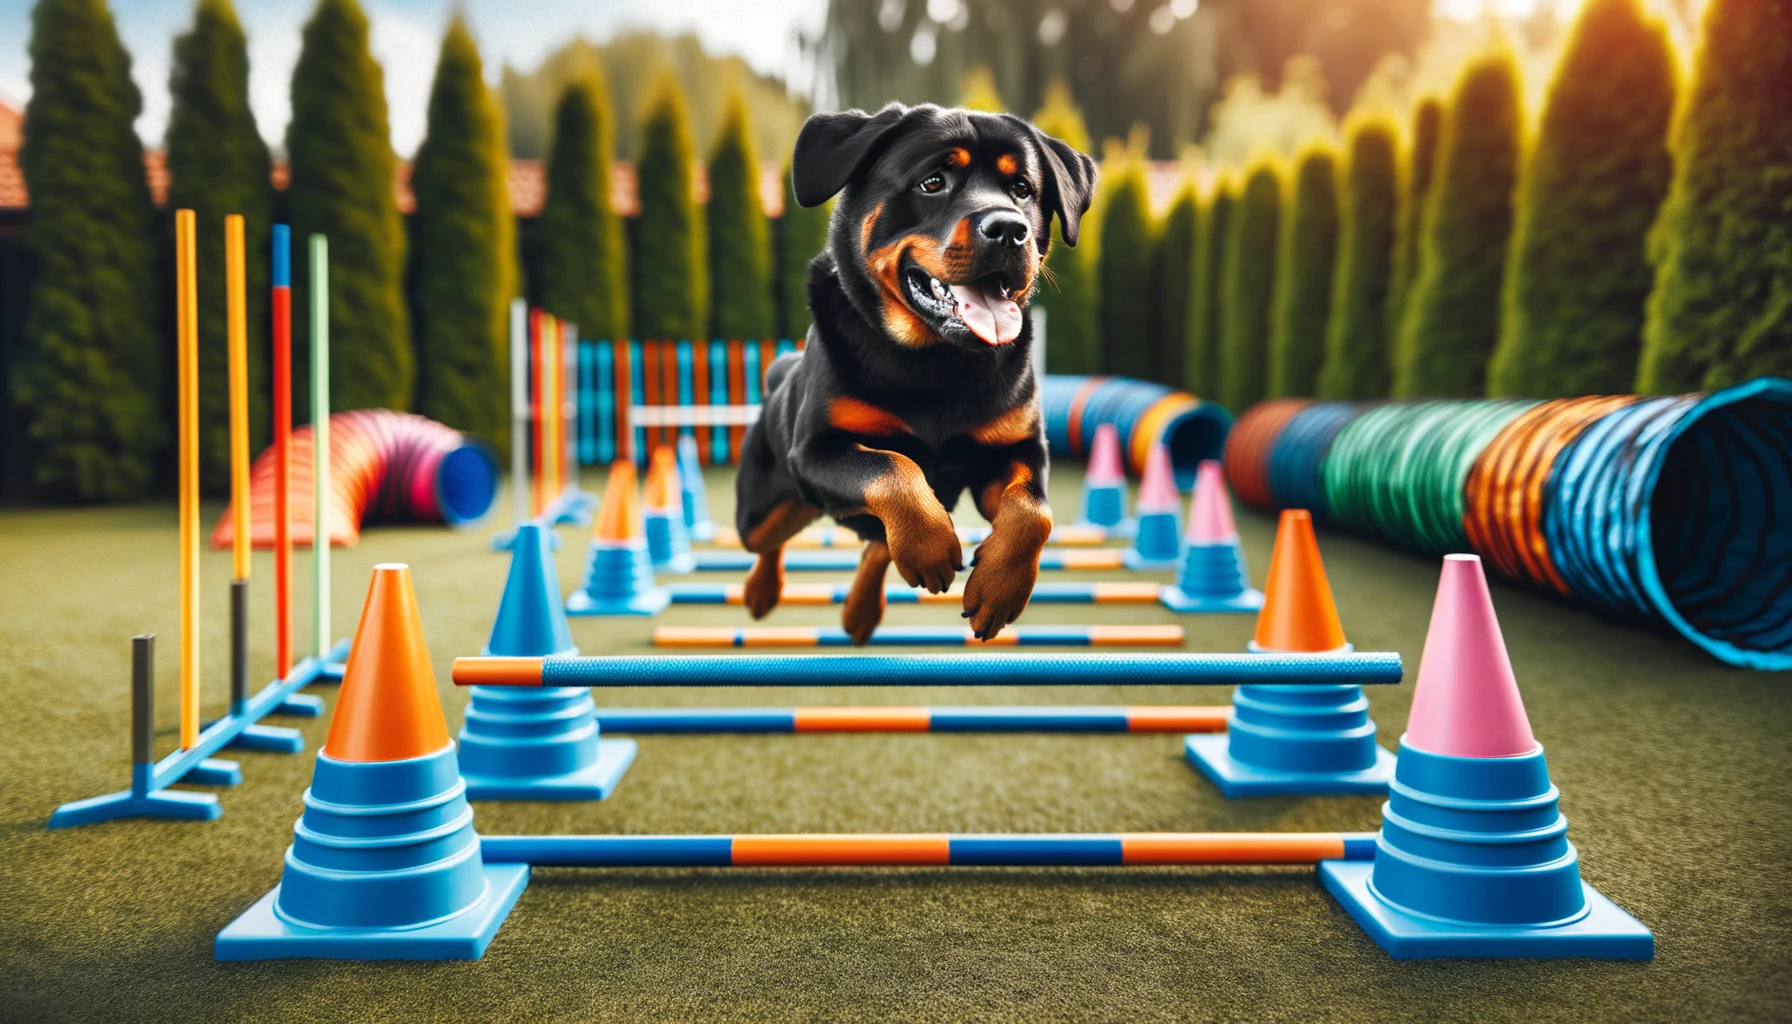 A Rottie and Lab Mix successfully navigating an agility course, illustrating the importance of varying training activities for intellectual stimulation